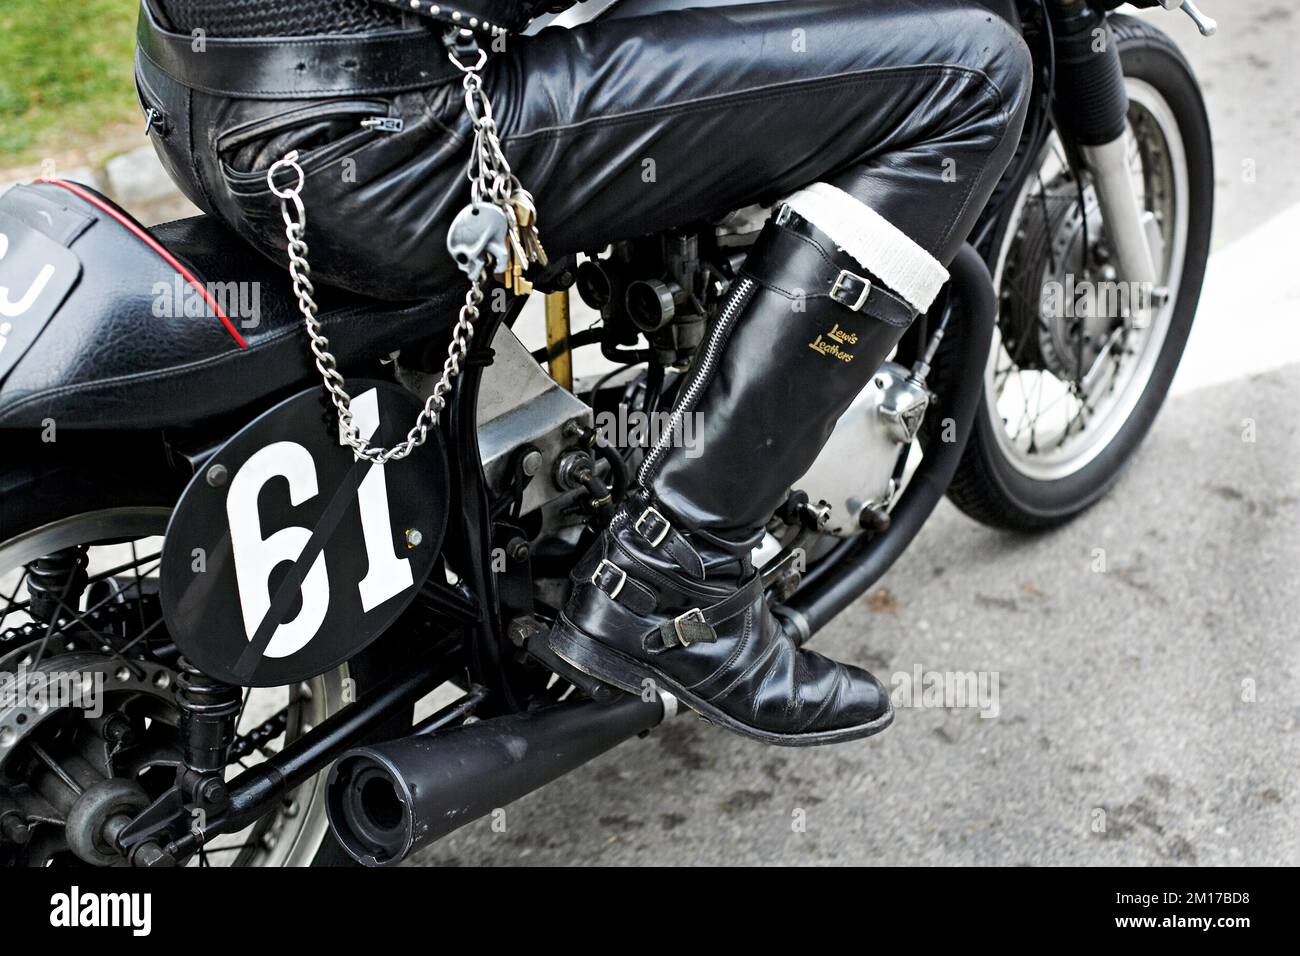 British rocker in black leather gear wearing boots on classic british motorcycle . Stock Photo